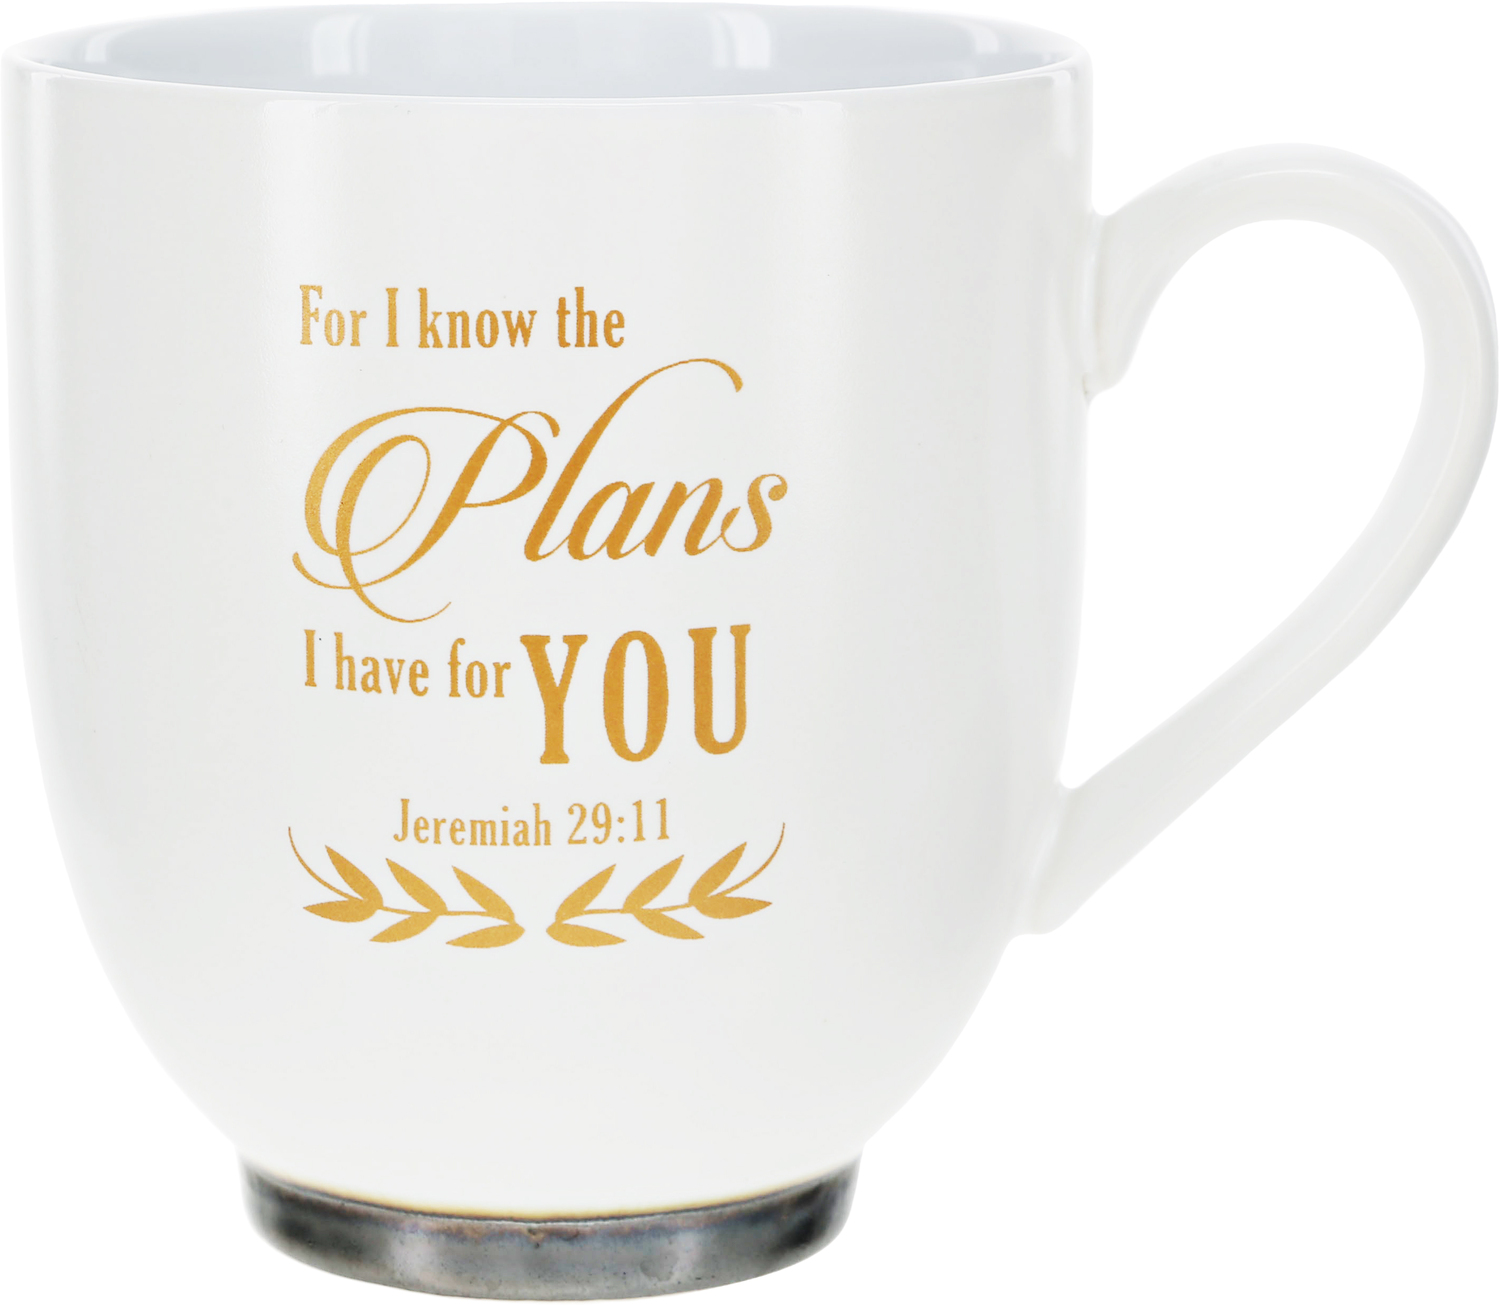 Plans by Blessed by You - Plans - 15.5 oz Cup